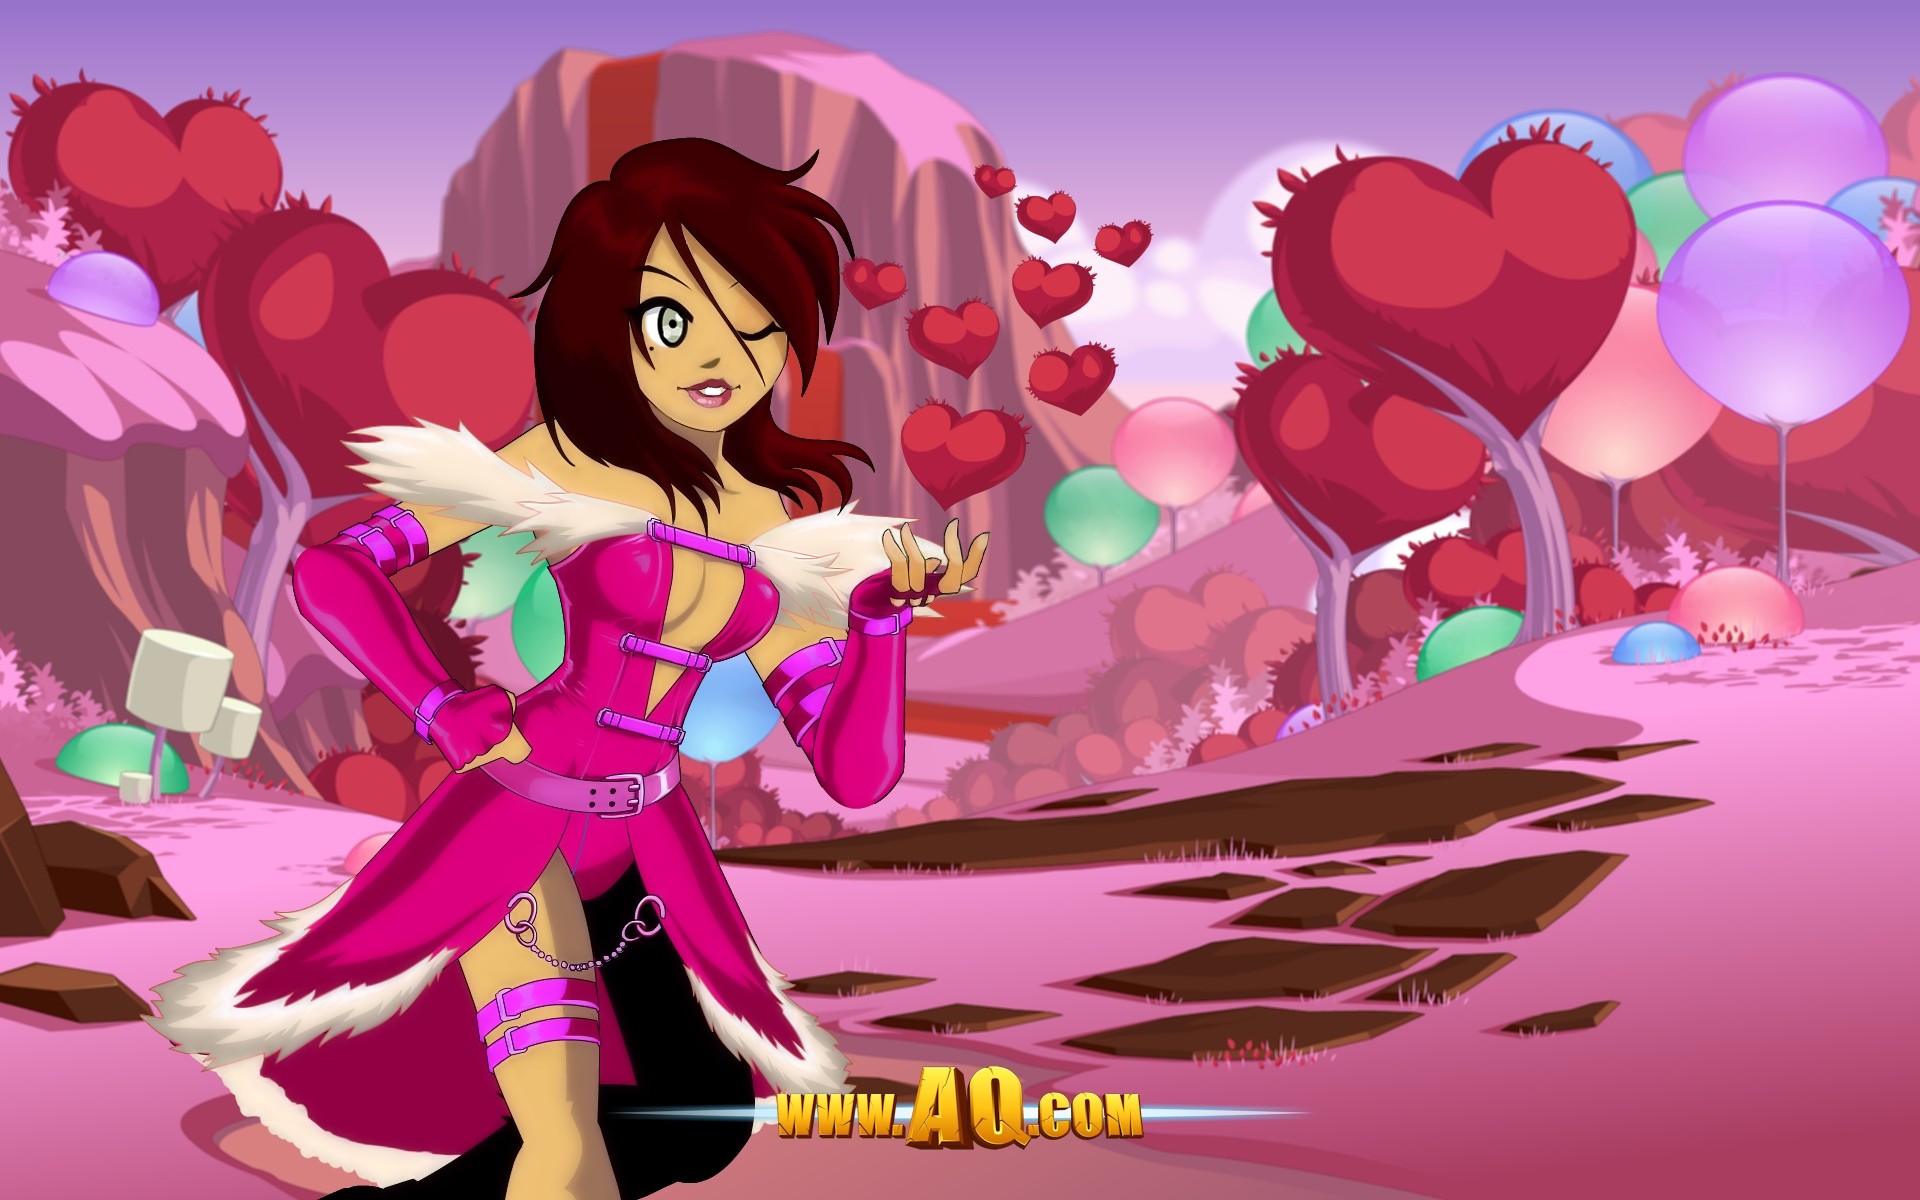 Beleen Valentines Day Wallpaper 1 Â· Click the pic for the full size!